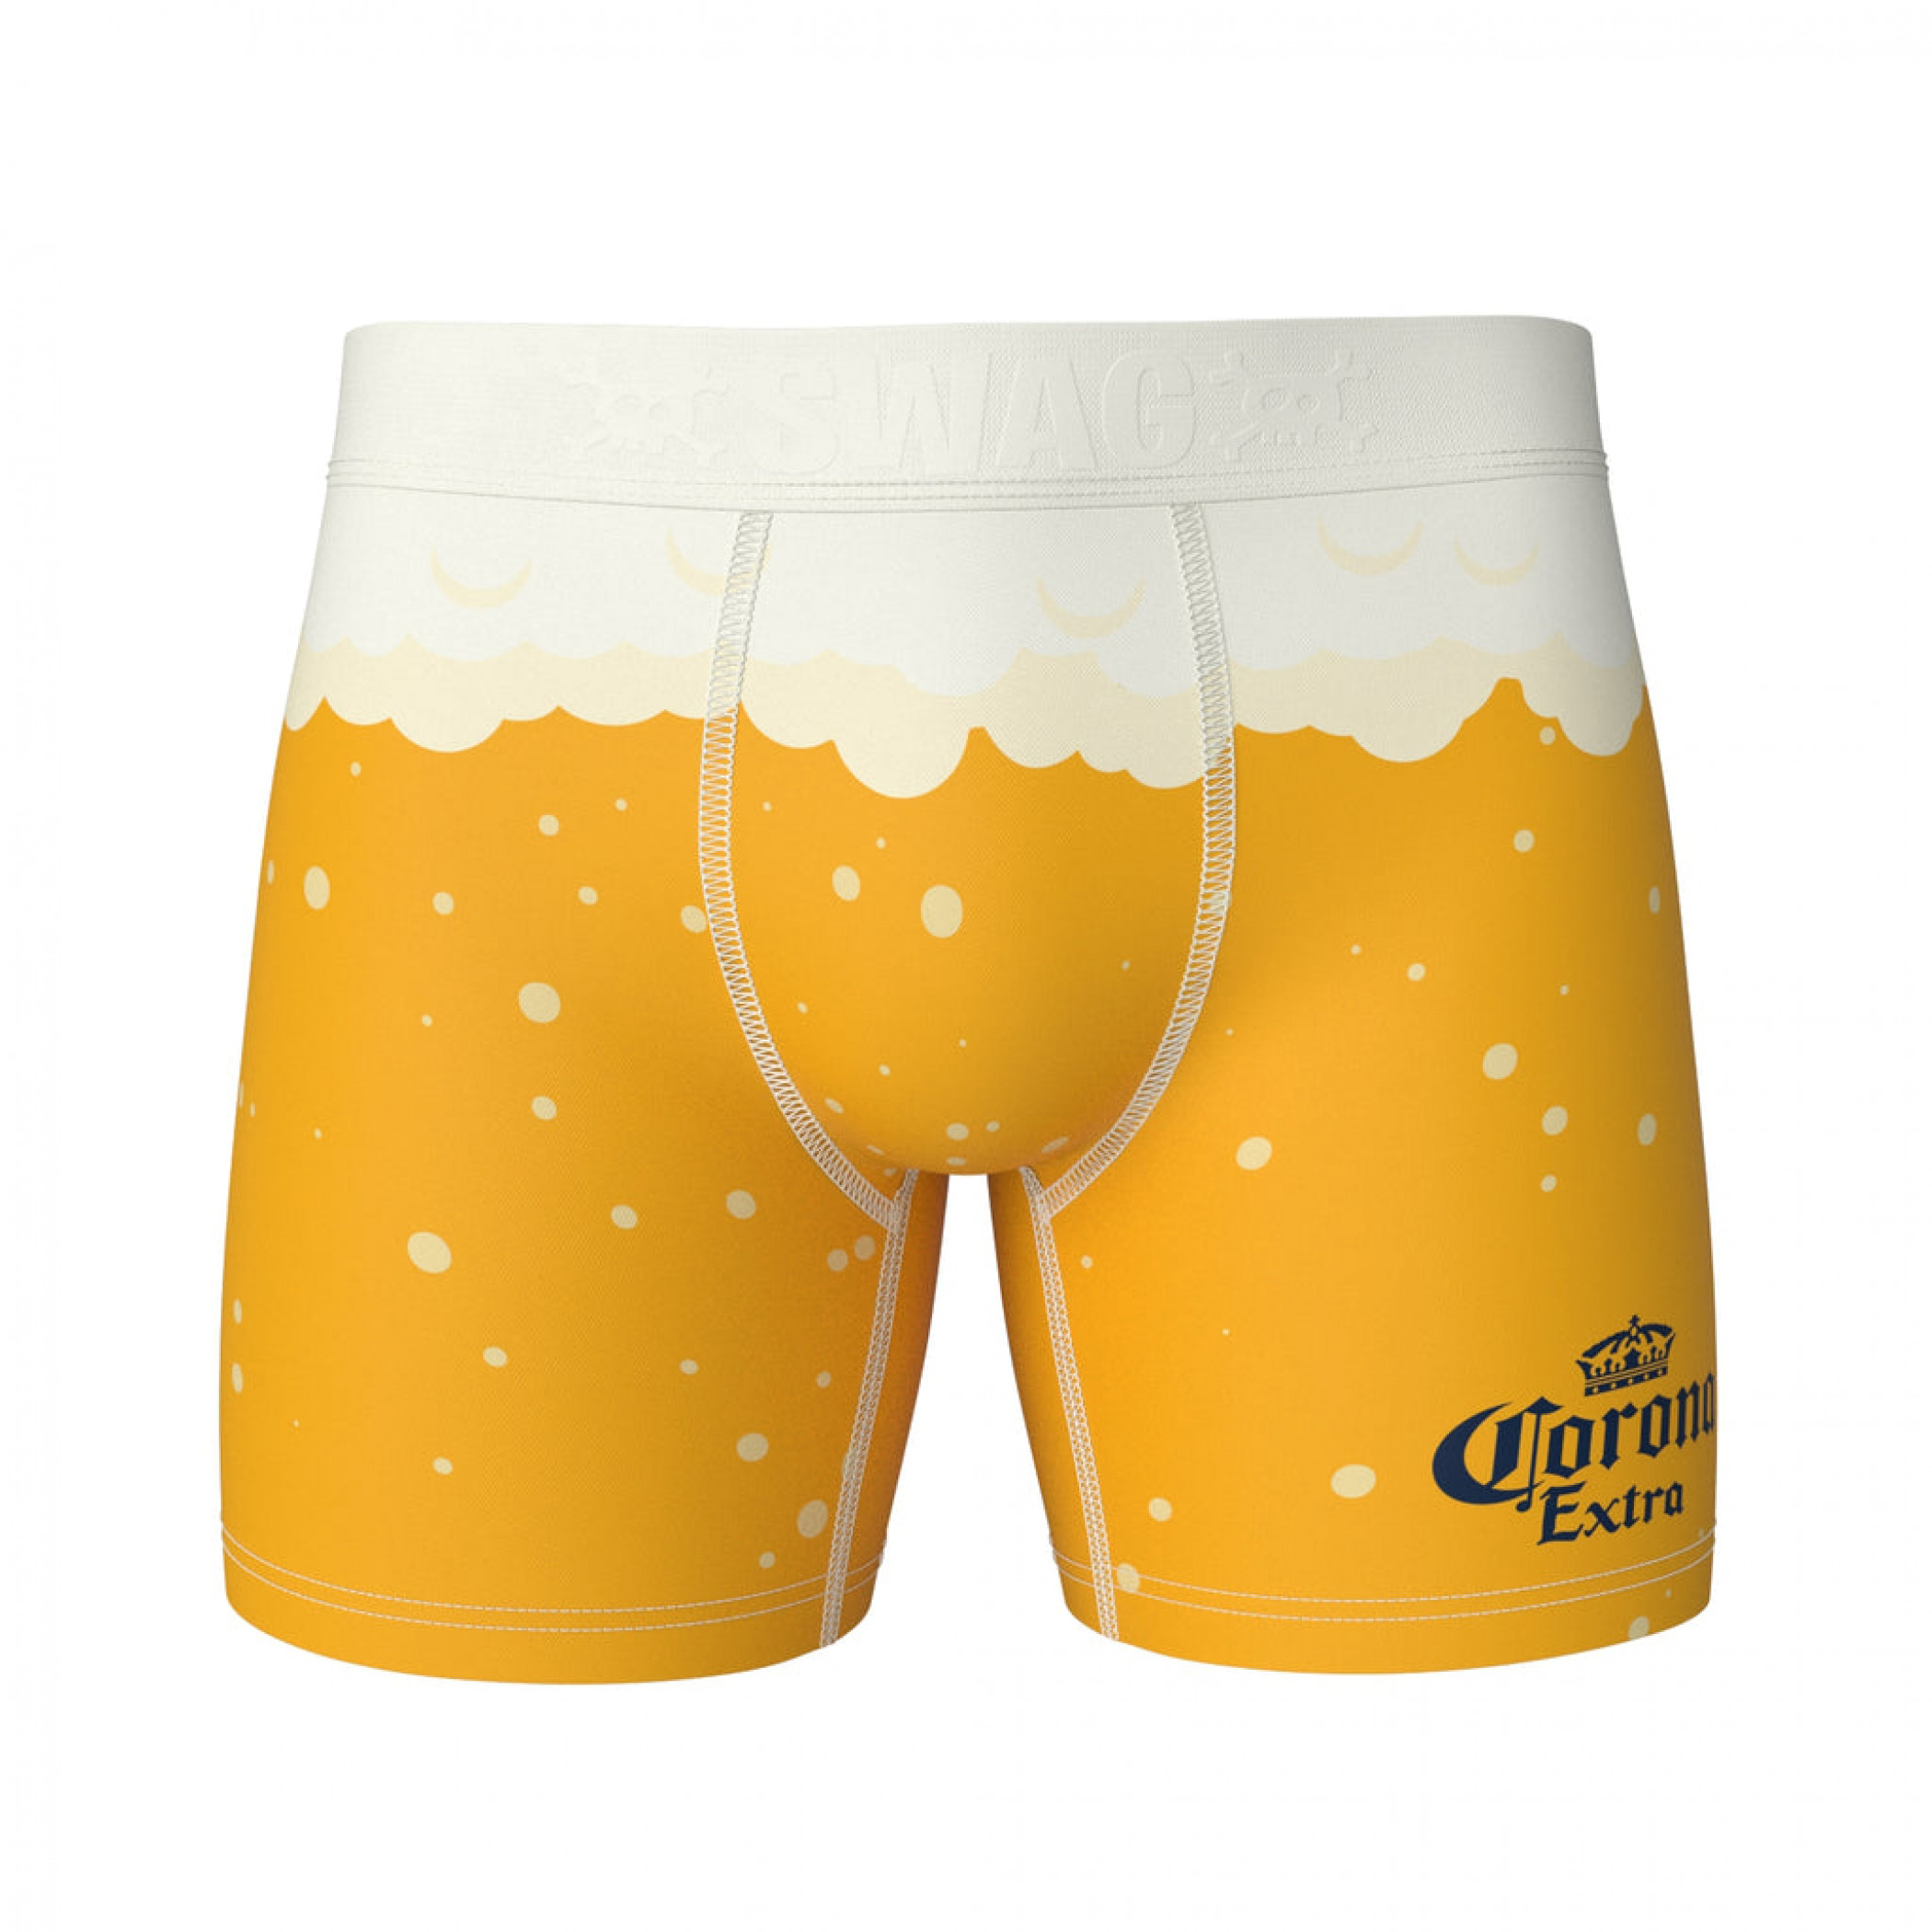 Corona Extra Foam and Suds Beer Can Swag Boxer Briefs